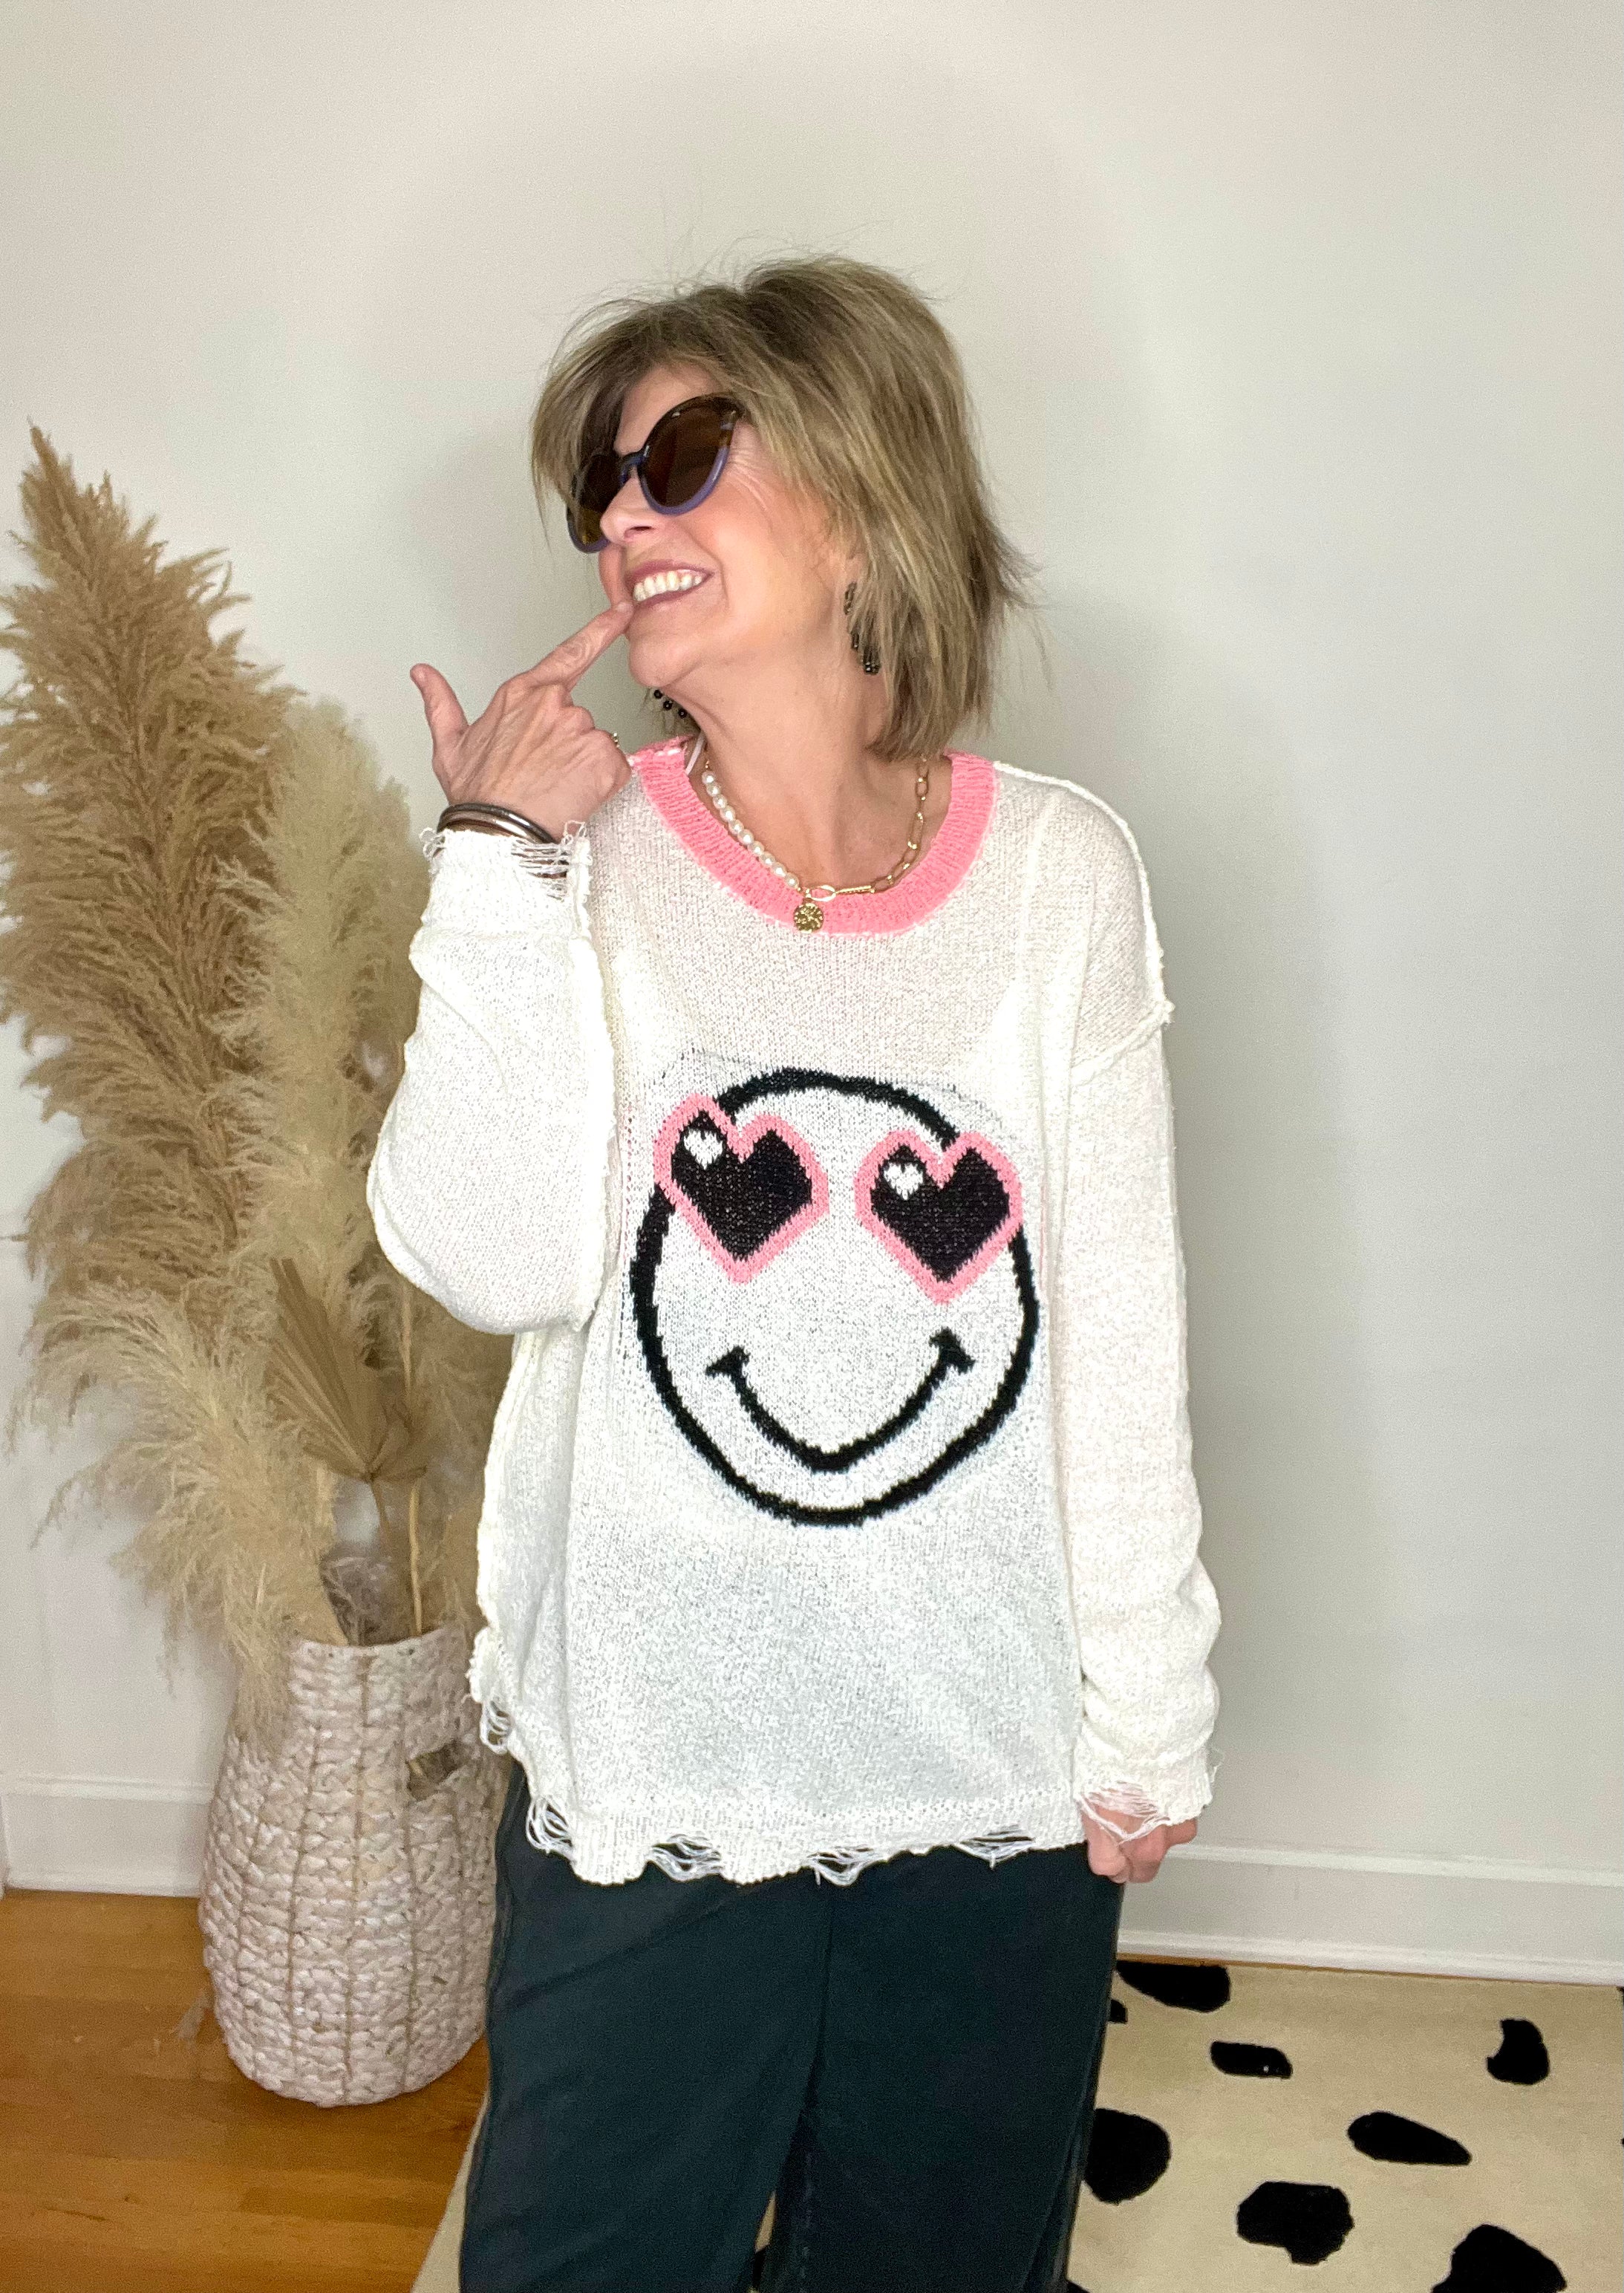 KEEP ON SMILING KNIT SWEATER